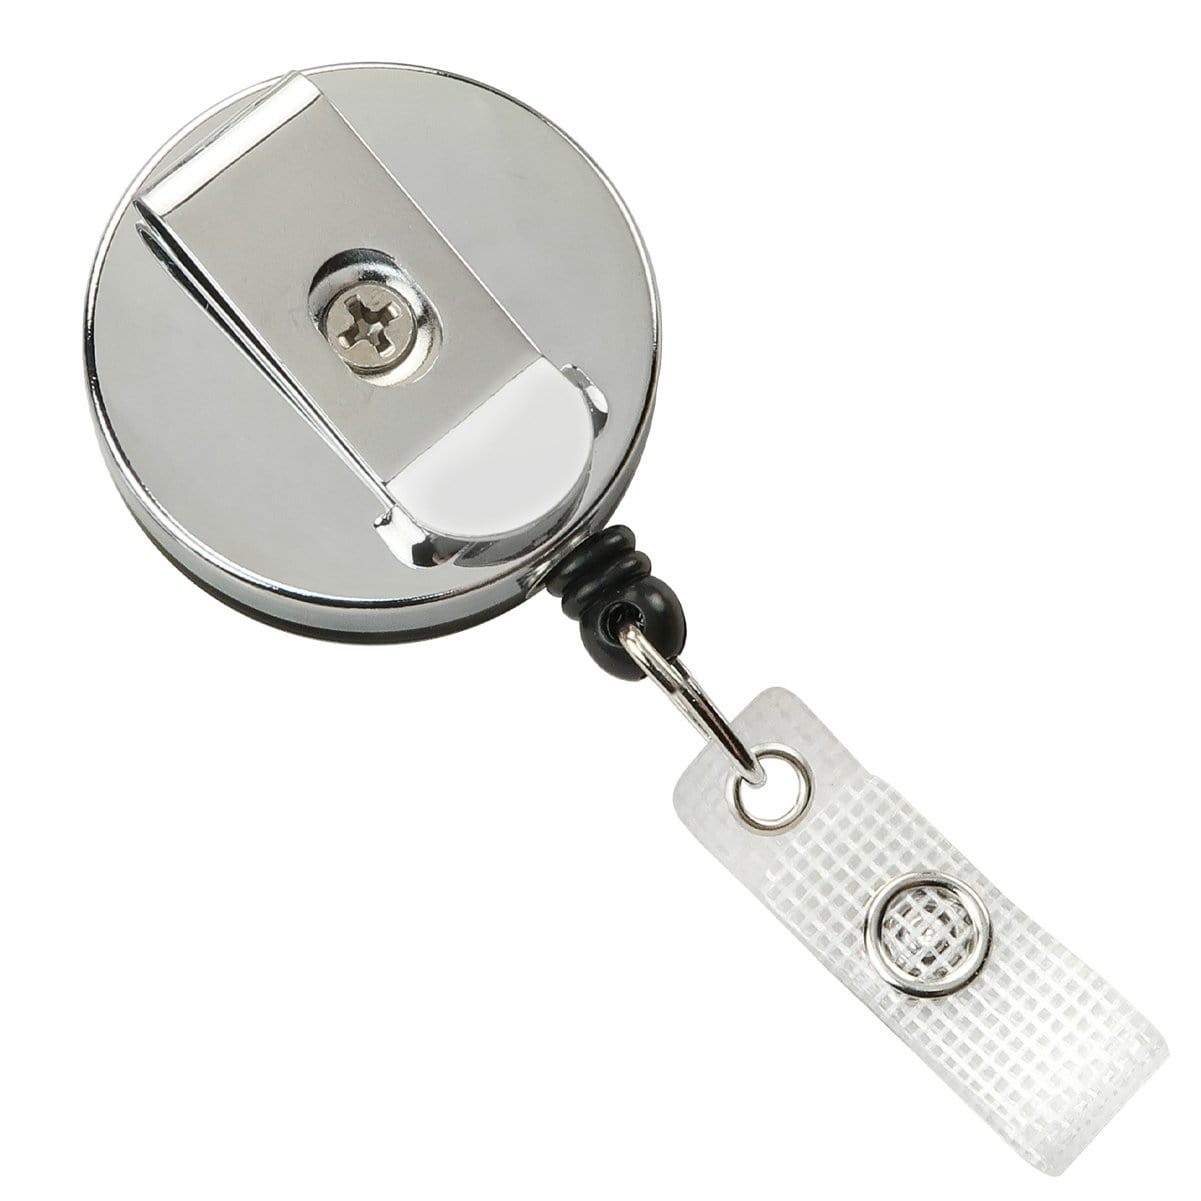 A Black Chrome Heavy Duty Badge Reel with Belt Clip (2120-3300) features a metal retractable reel with a sturdy belt clip and a clear plastic strap.